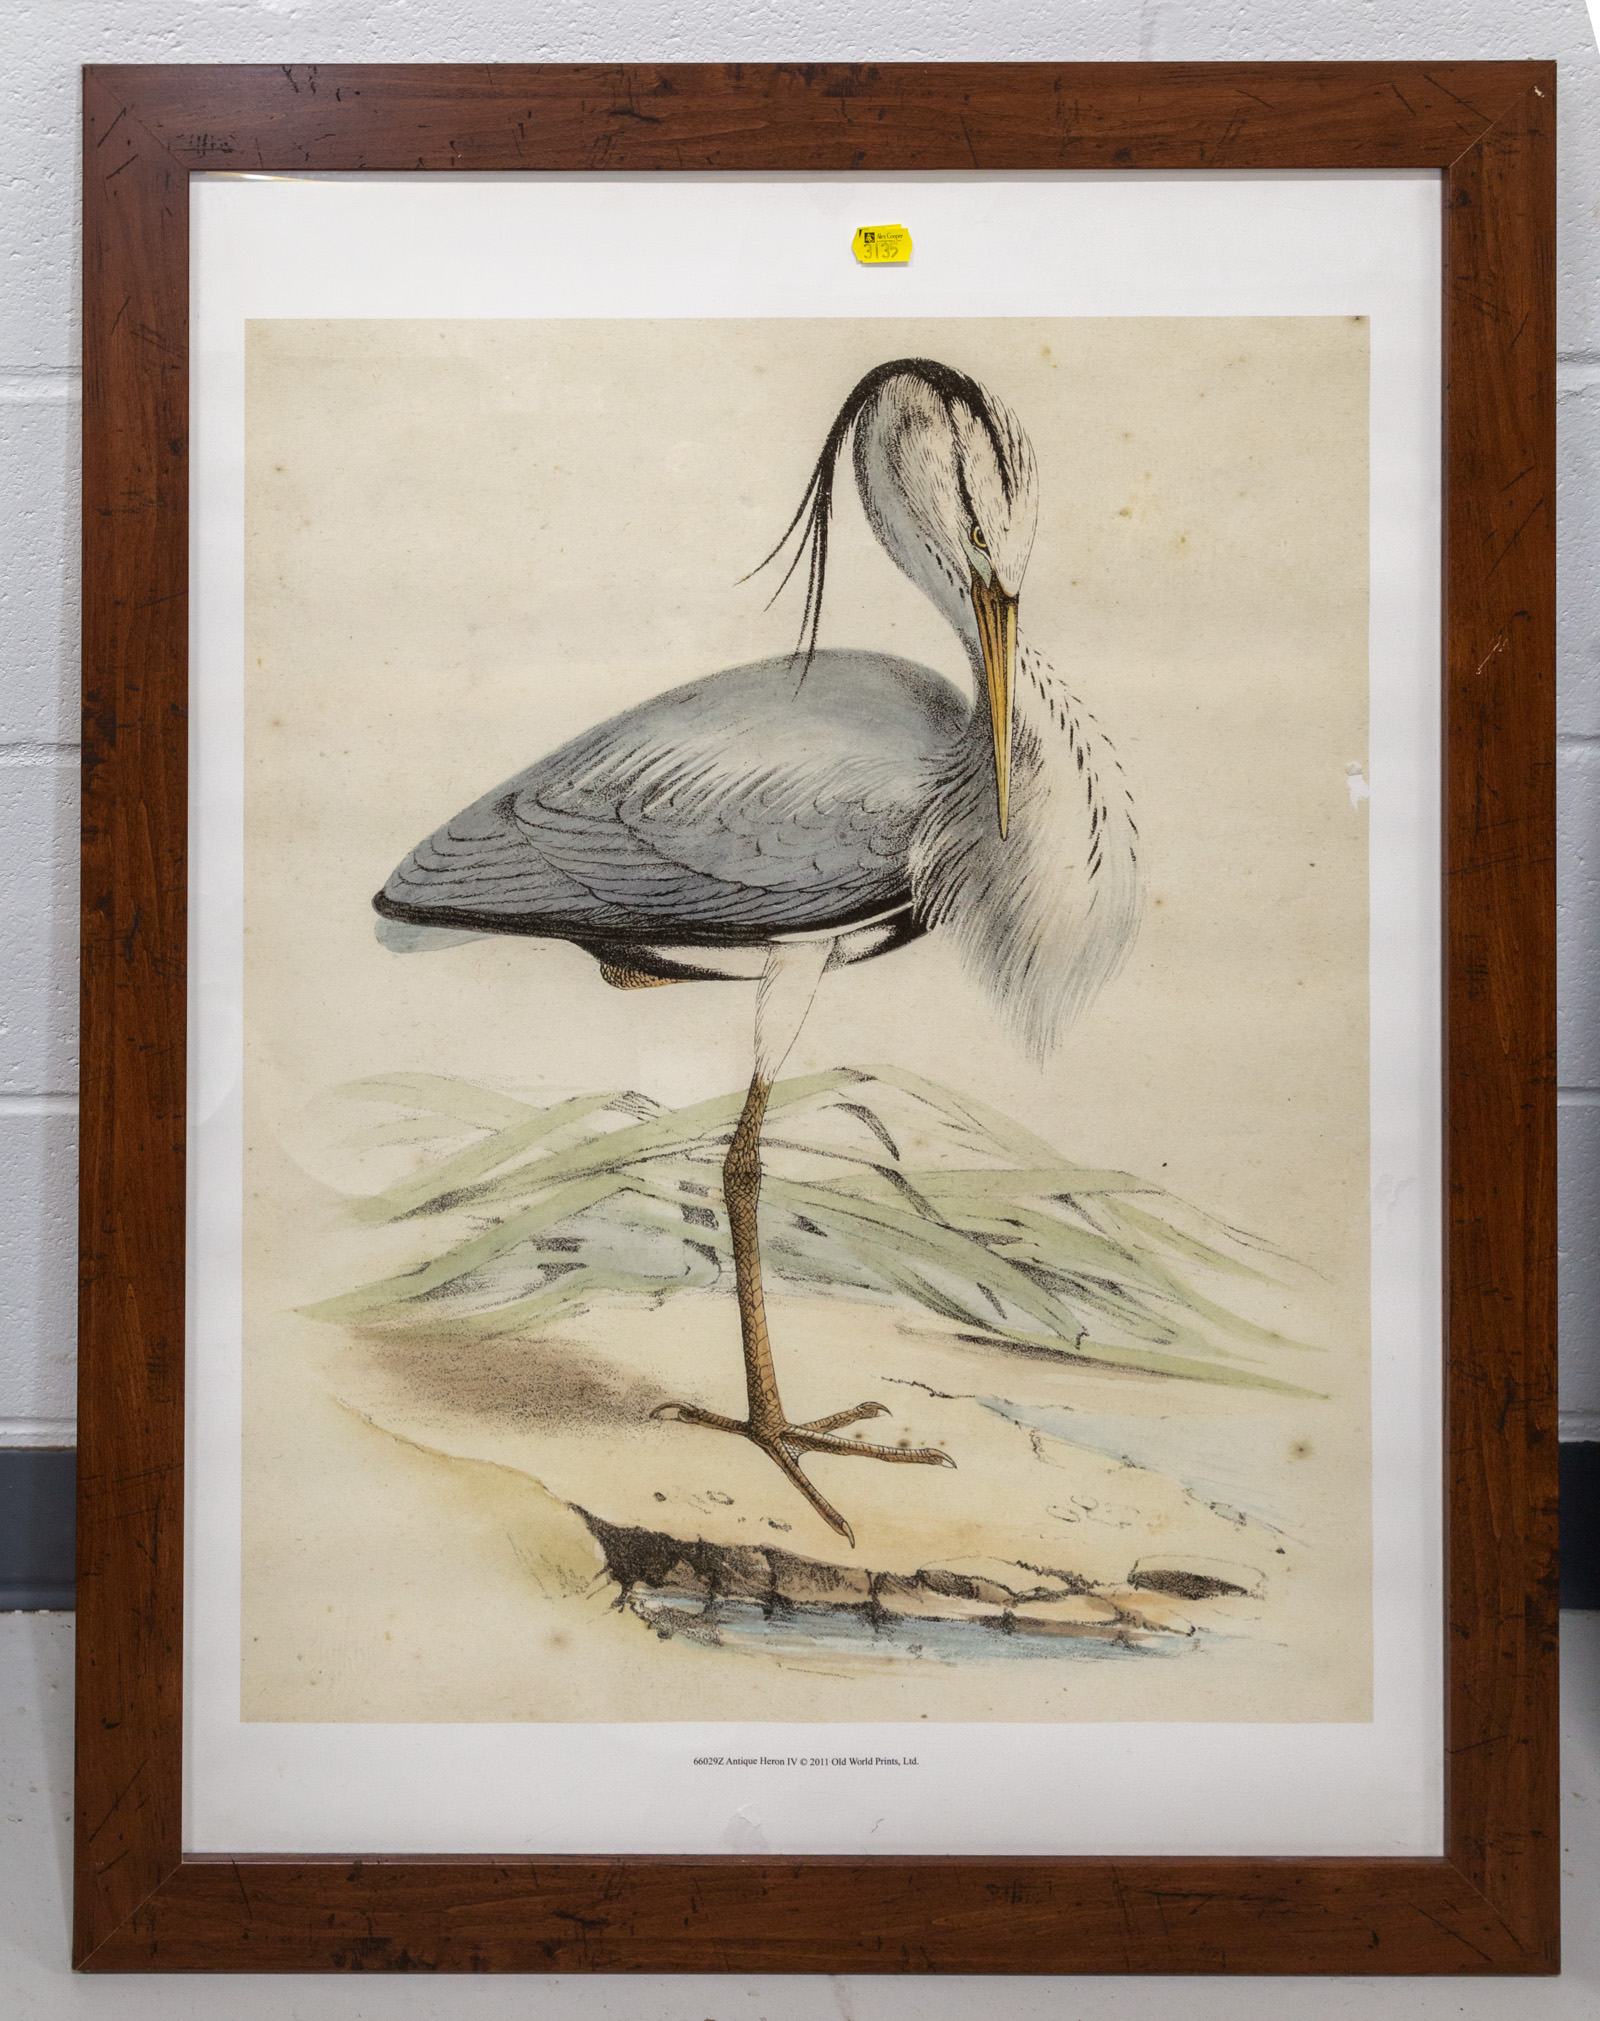 FRAMED REPRODUCTION PRINT OF HERON